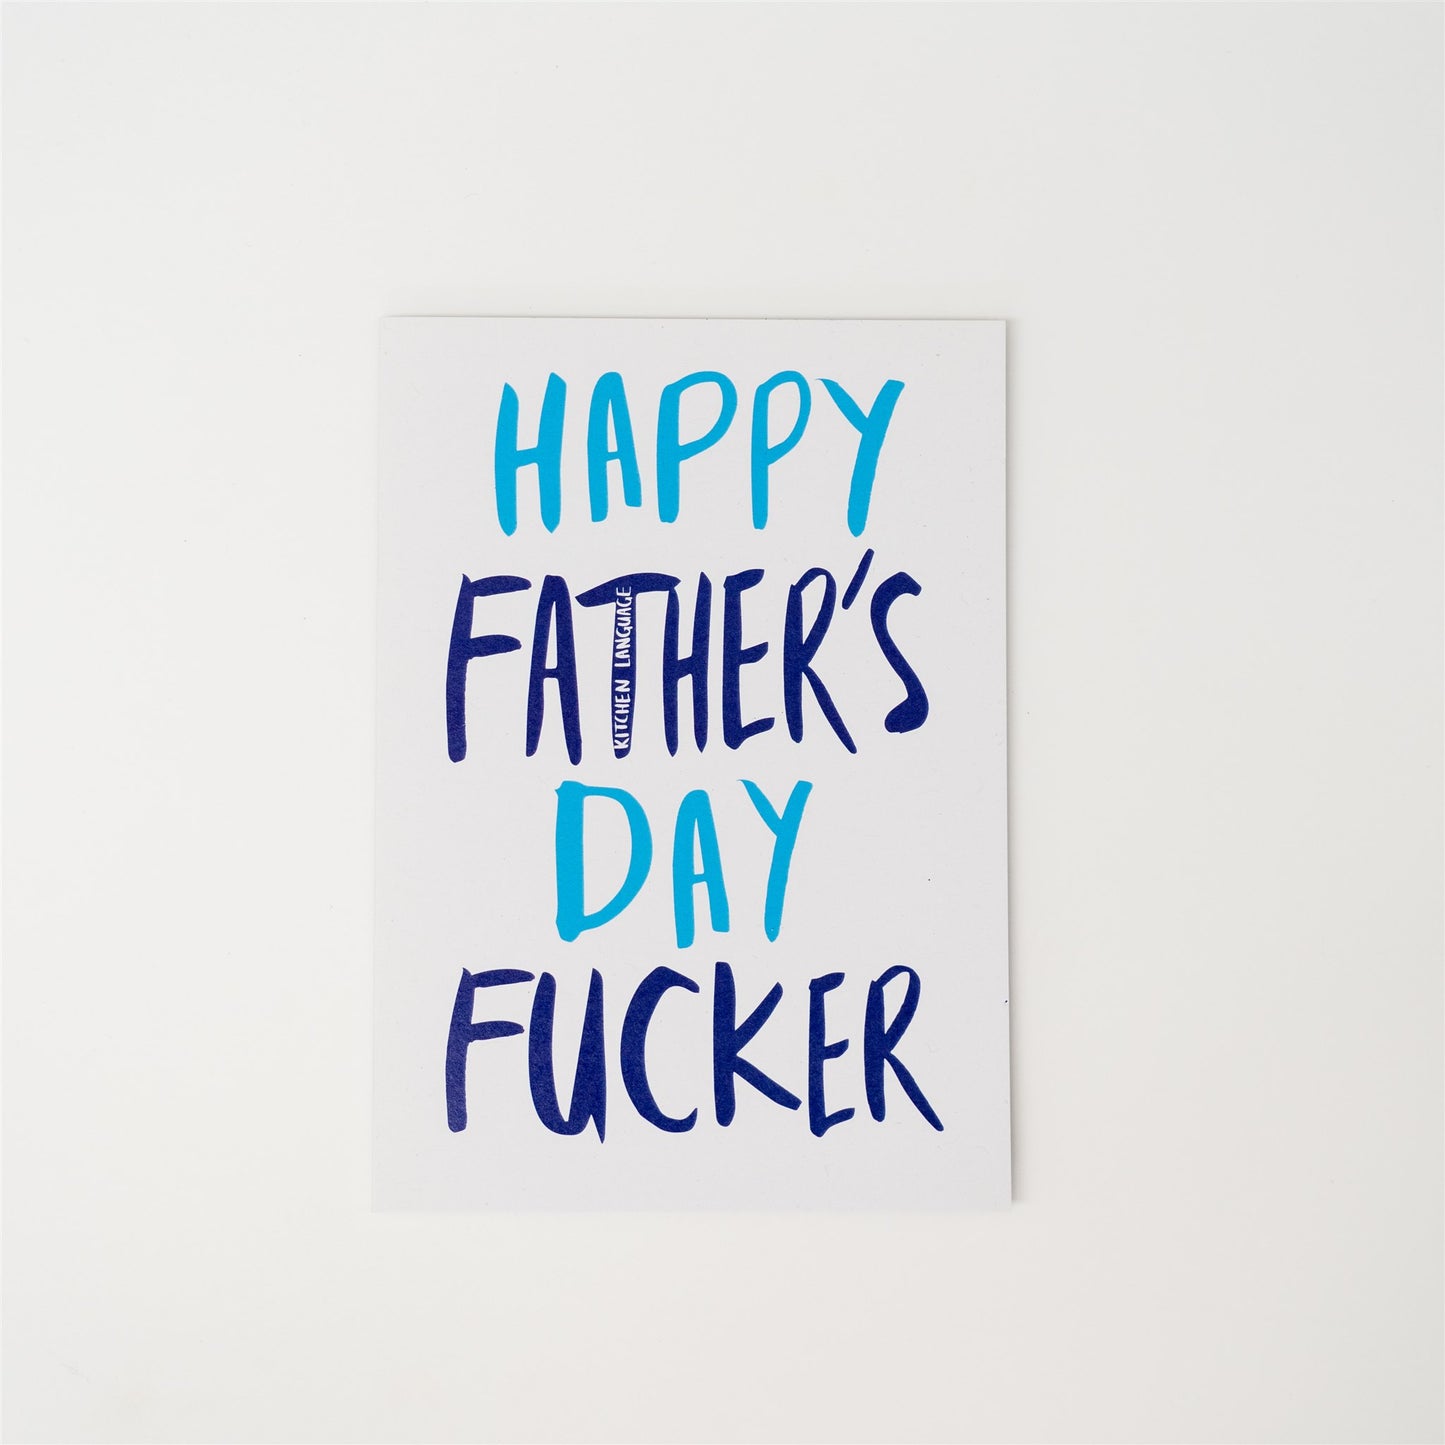 Happy Fathers Day Fucker- greeting card- kitchen language